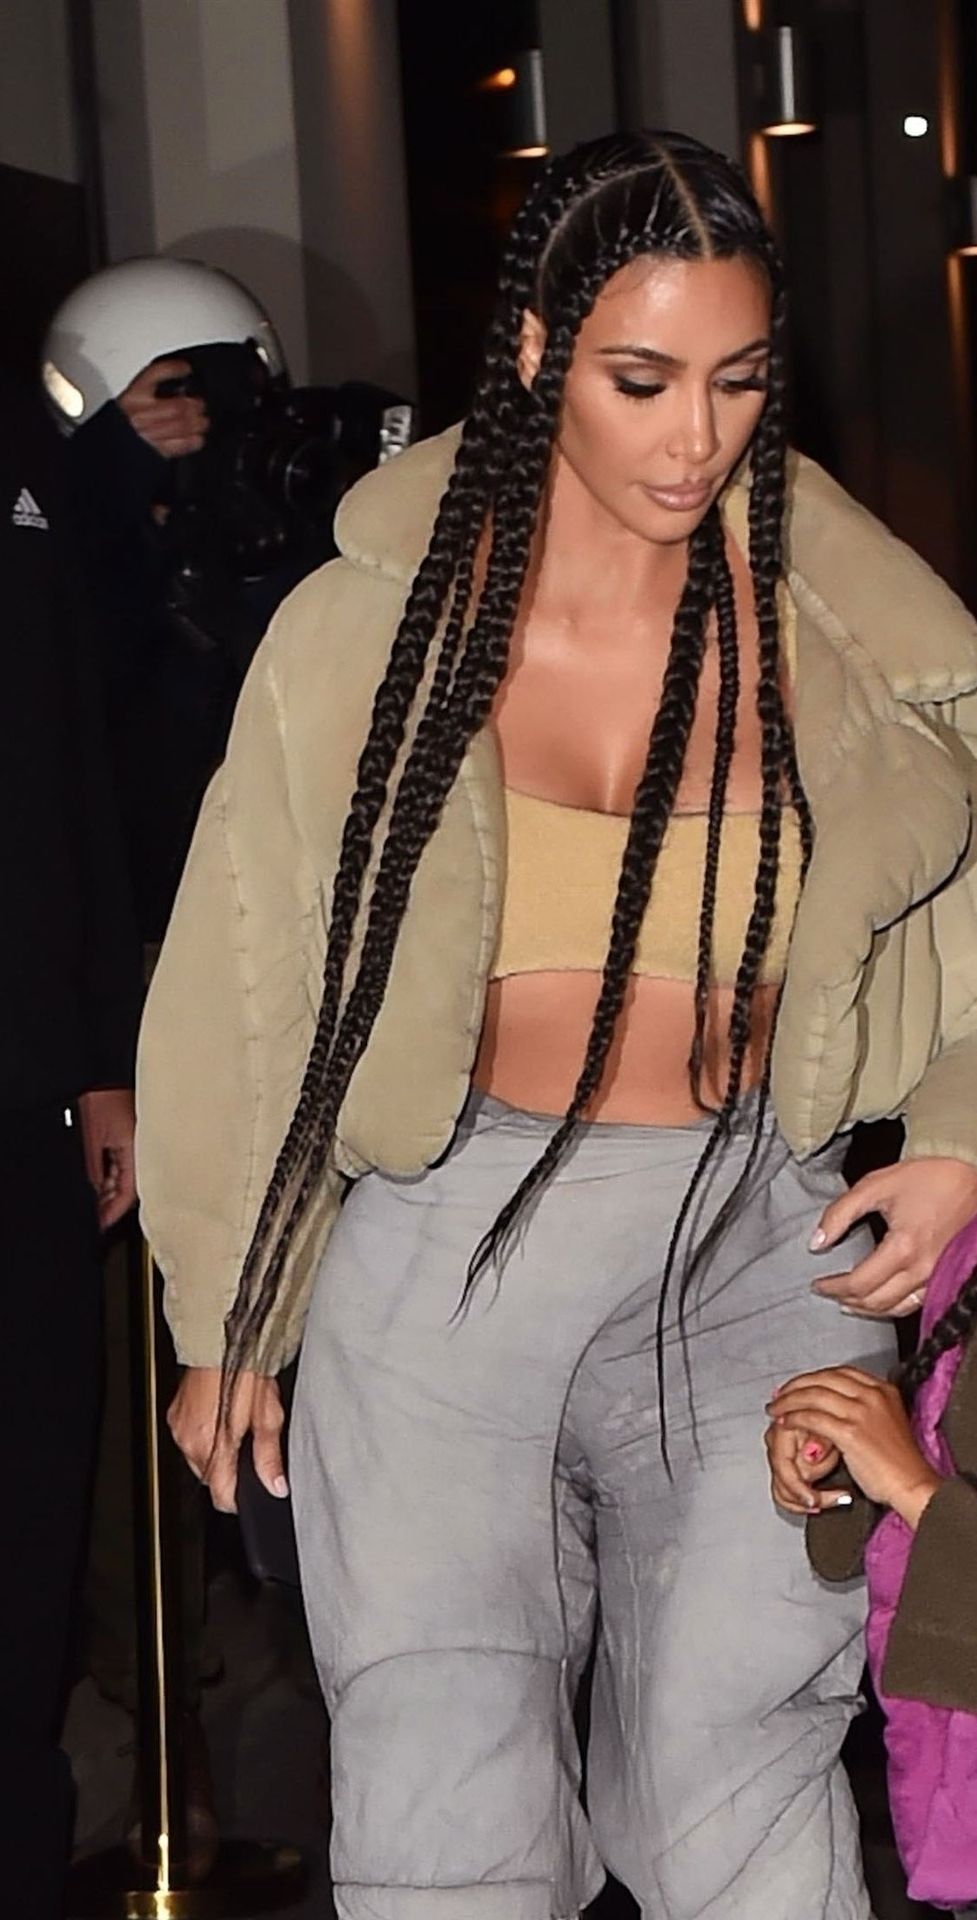 Kim Kardashian Arrives at the Kanye West after party in Paris (21 Photos)